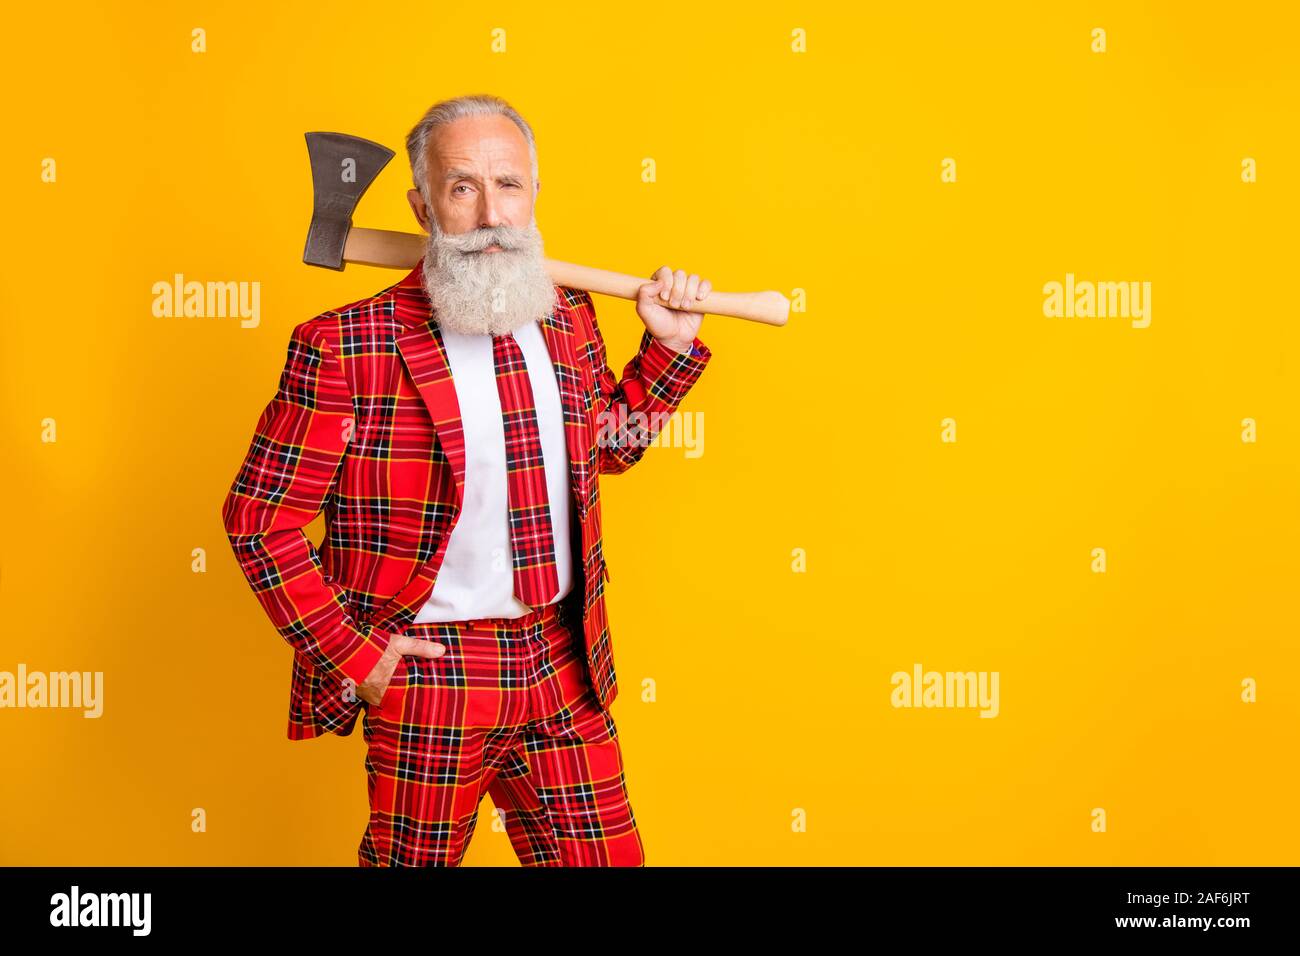 Photo of cool grandpa white beard holding big ax hands playing serial killer role at halloween wear plaid red costume outfit isolated bright yellow Stock Photo